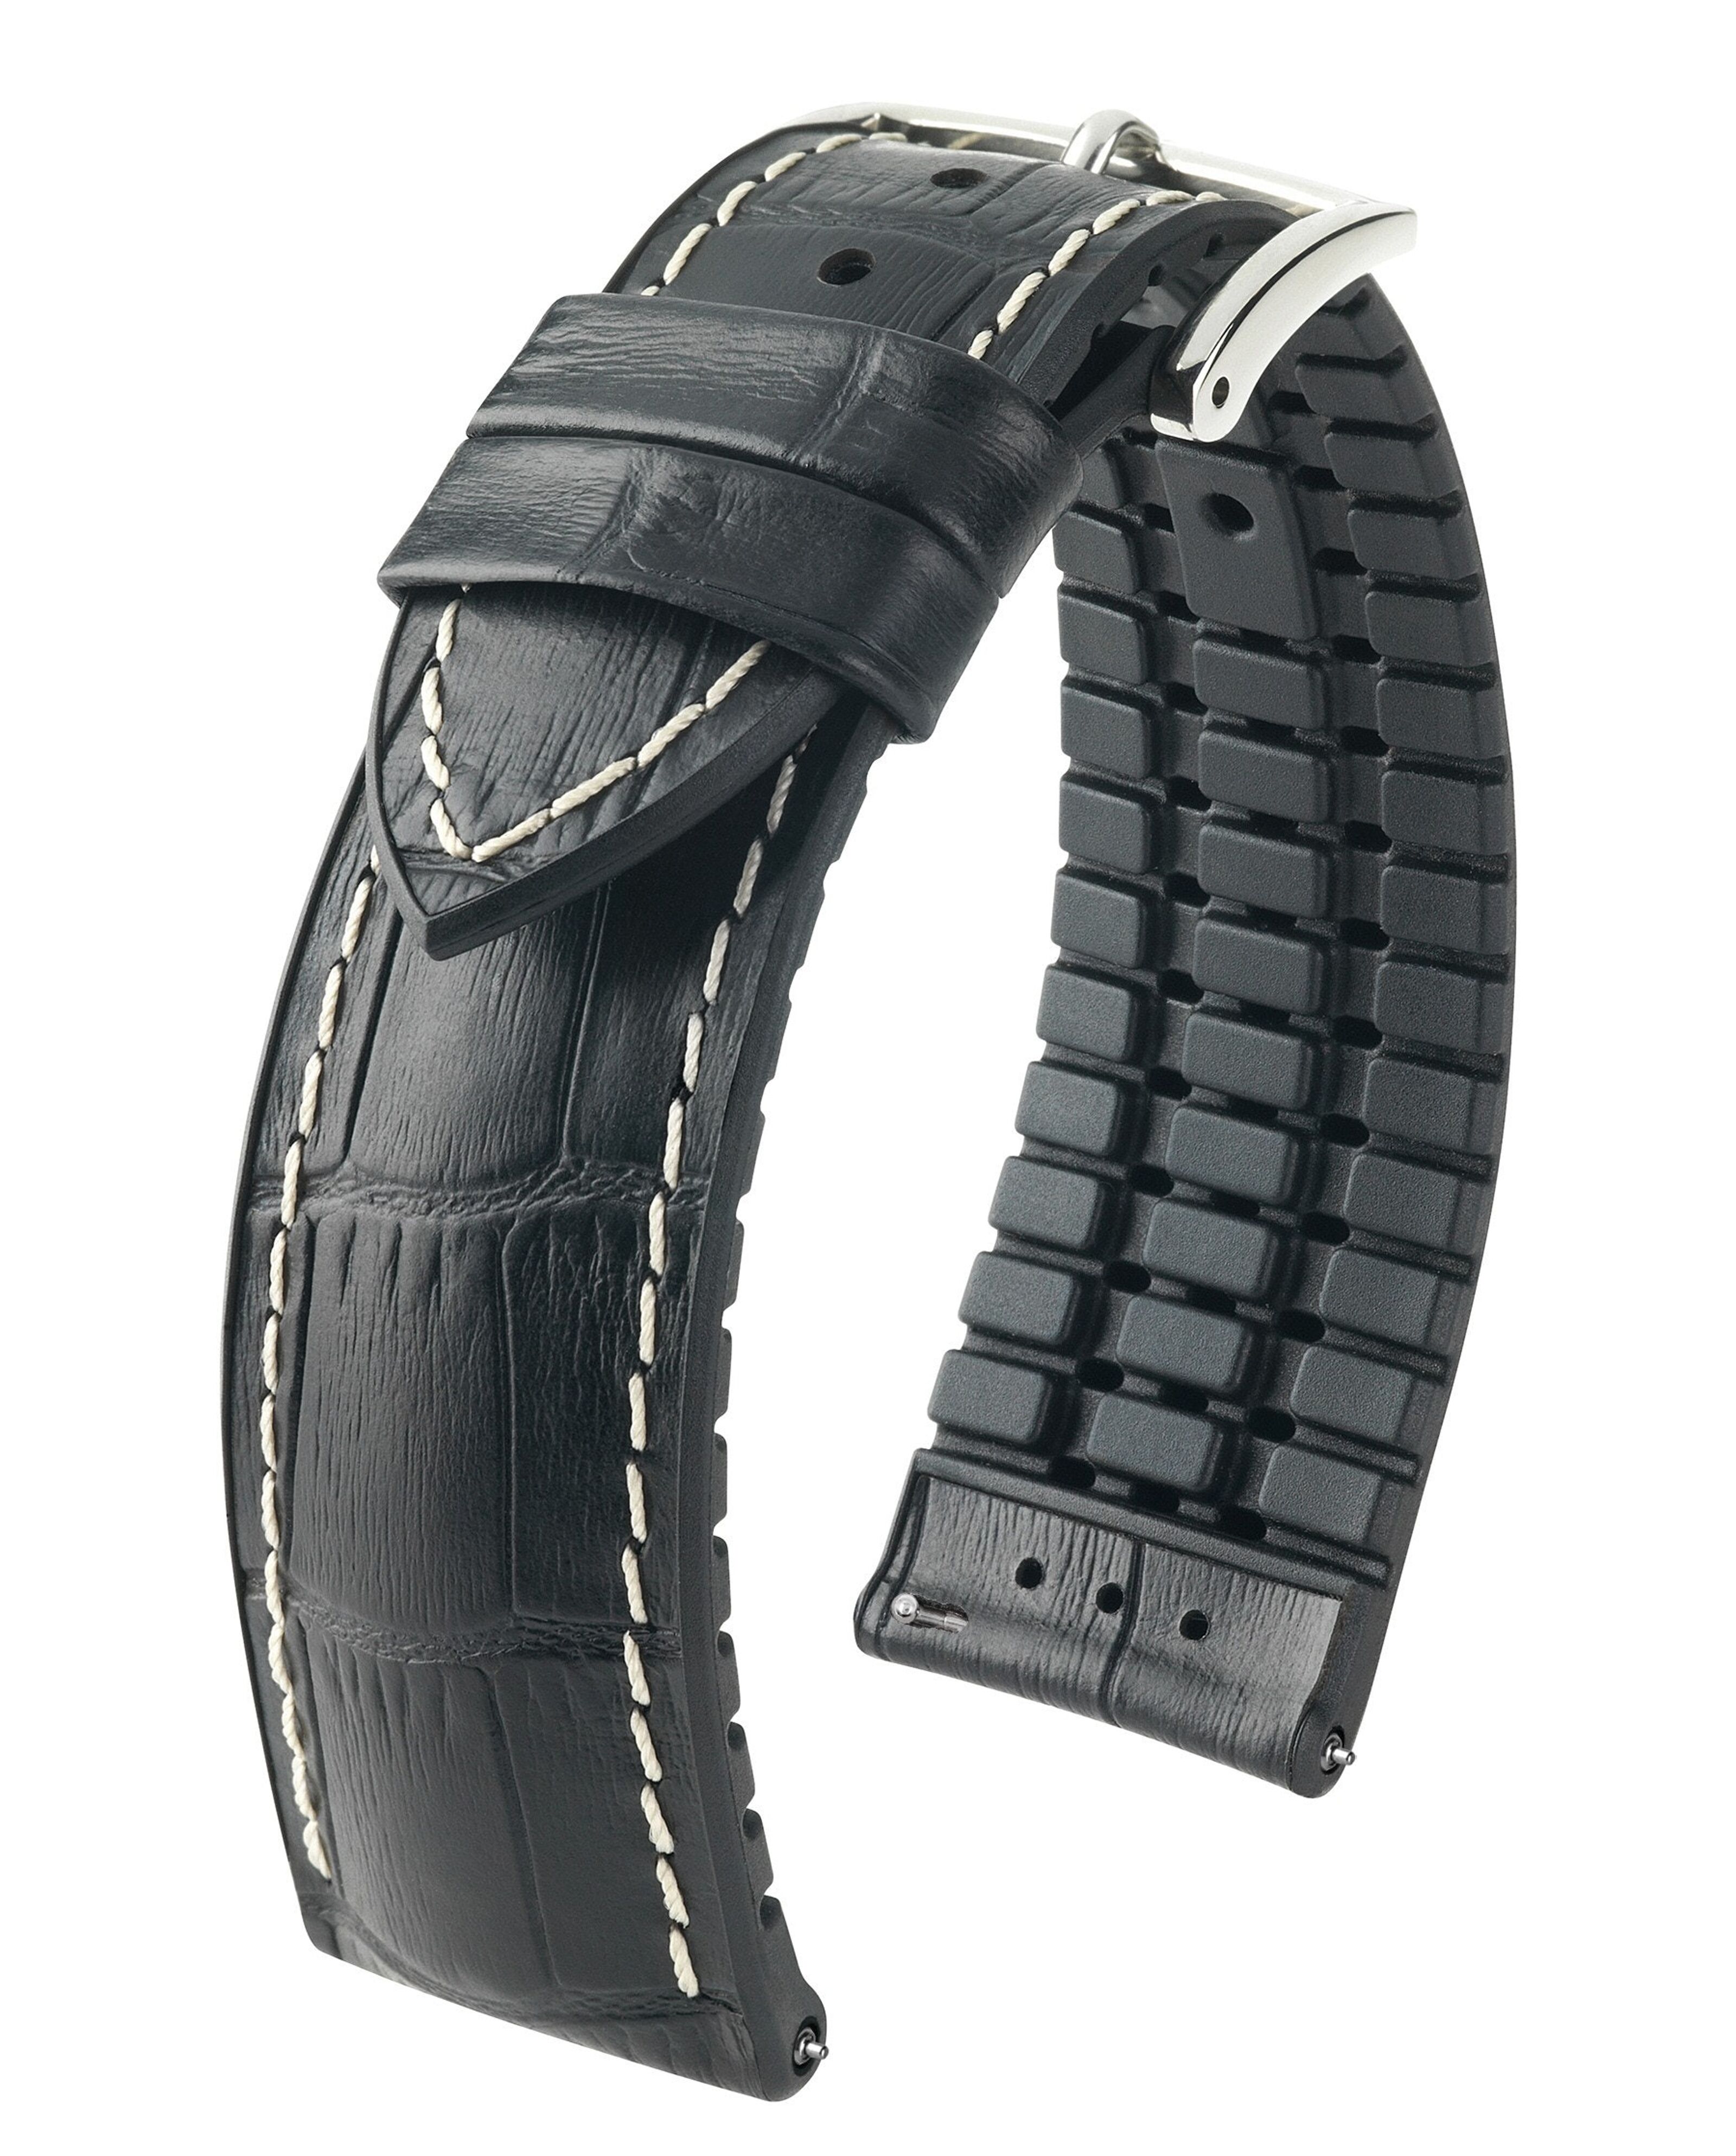 wholesale 22mm core - men of Italian - attachment black L 24mm with sporty alligator Buy 20mm, available watch women & calfskin rubber - strap embossing in - the George - widths for HIRSCH - and